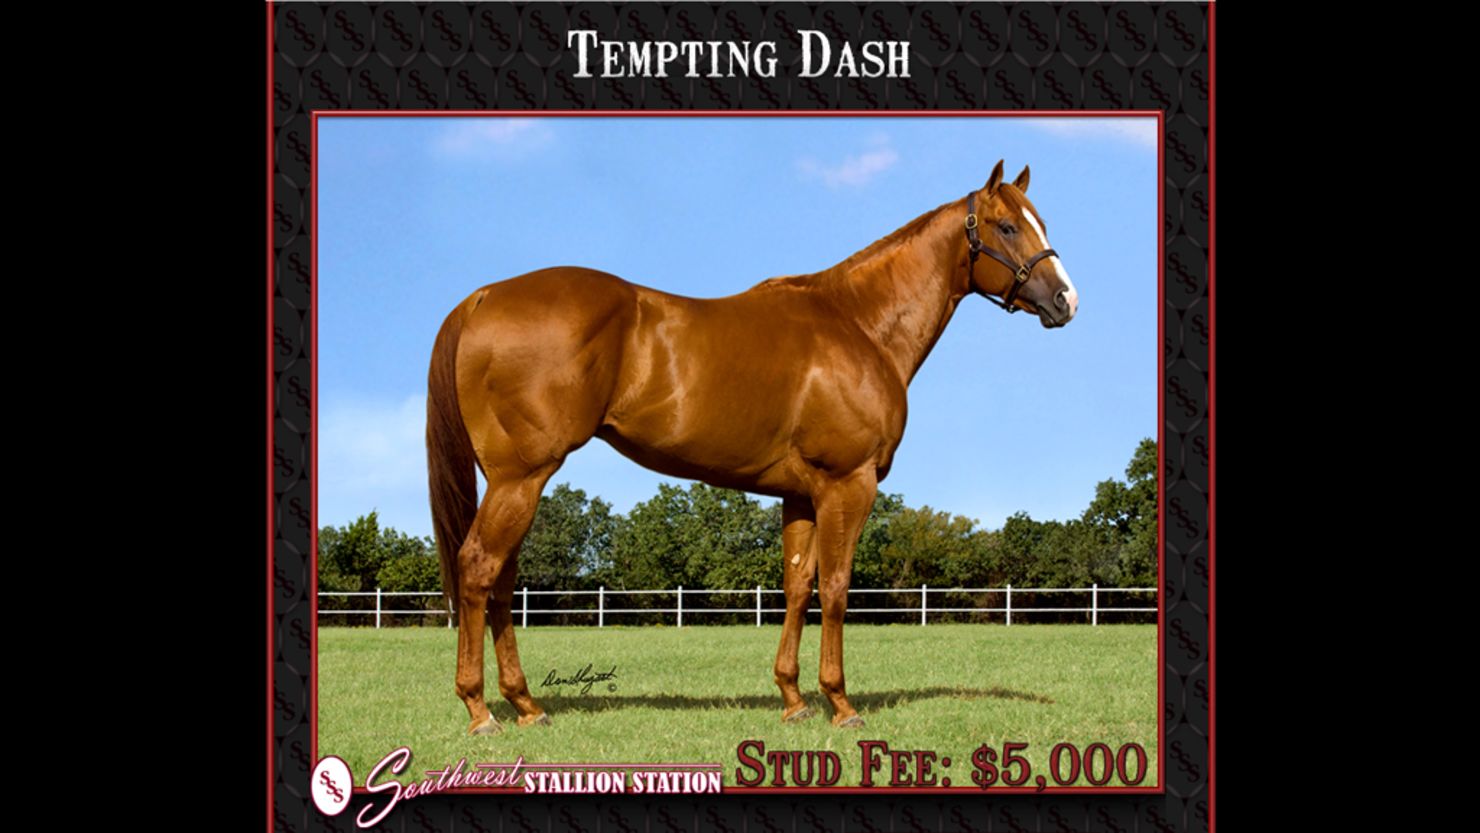 Tempting Dash is among the horses used in an alleged laundering operation, investigators say.